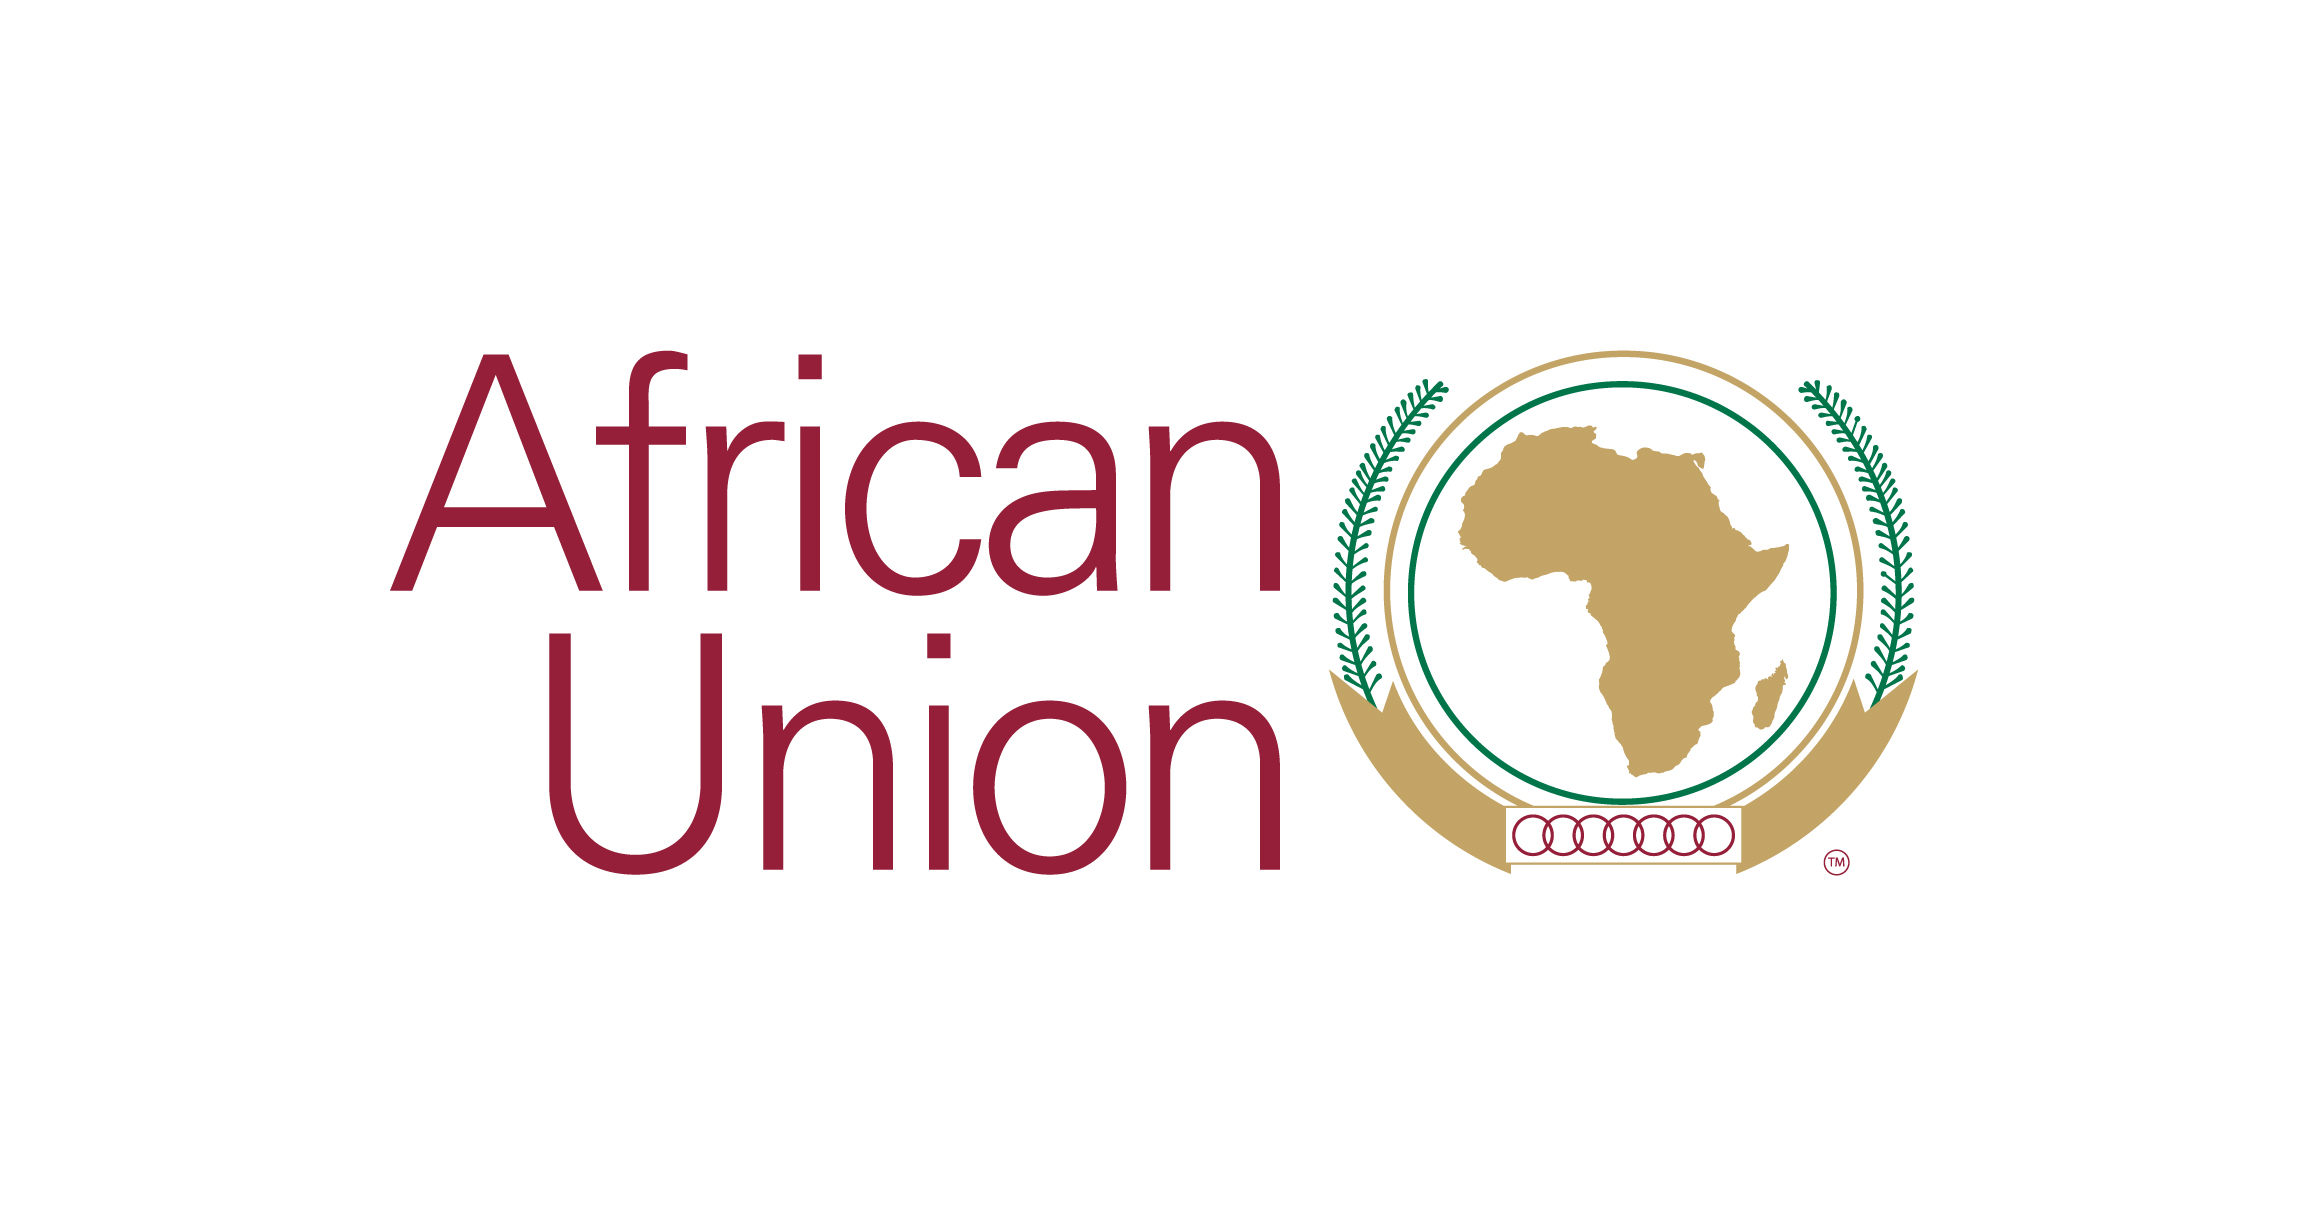 Logo of the African union